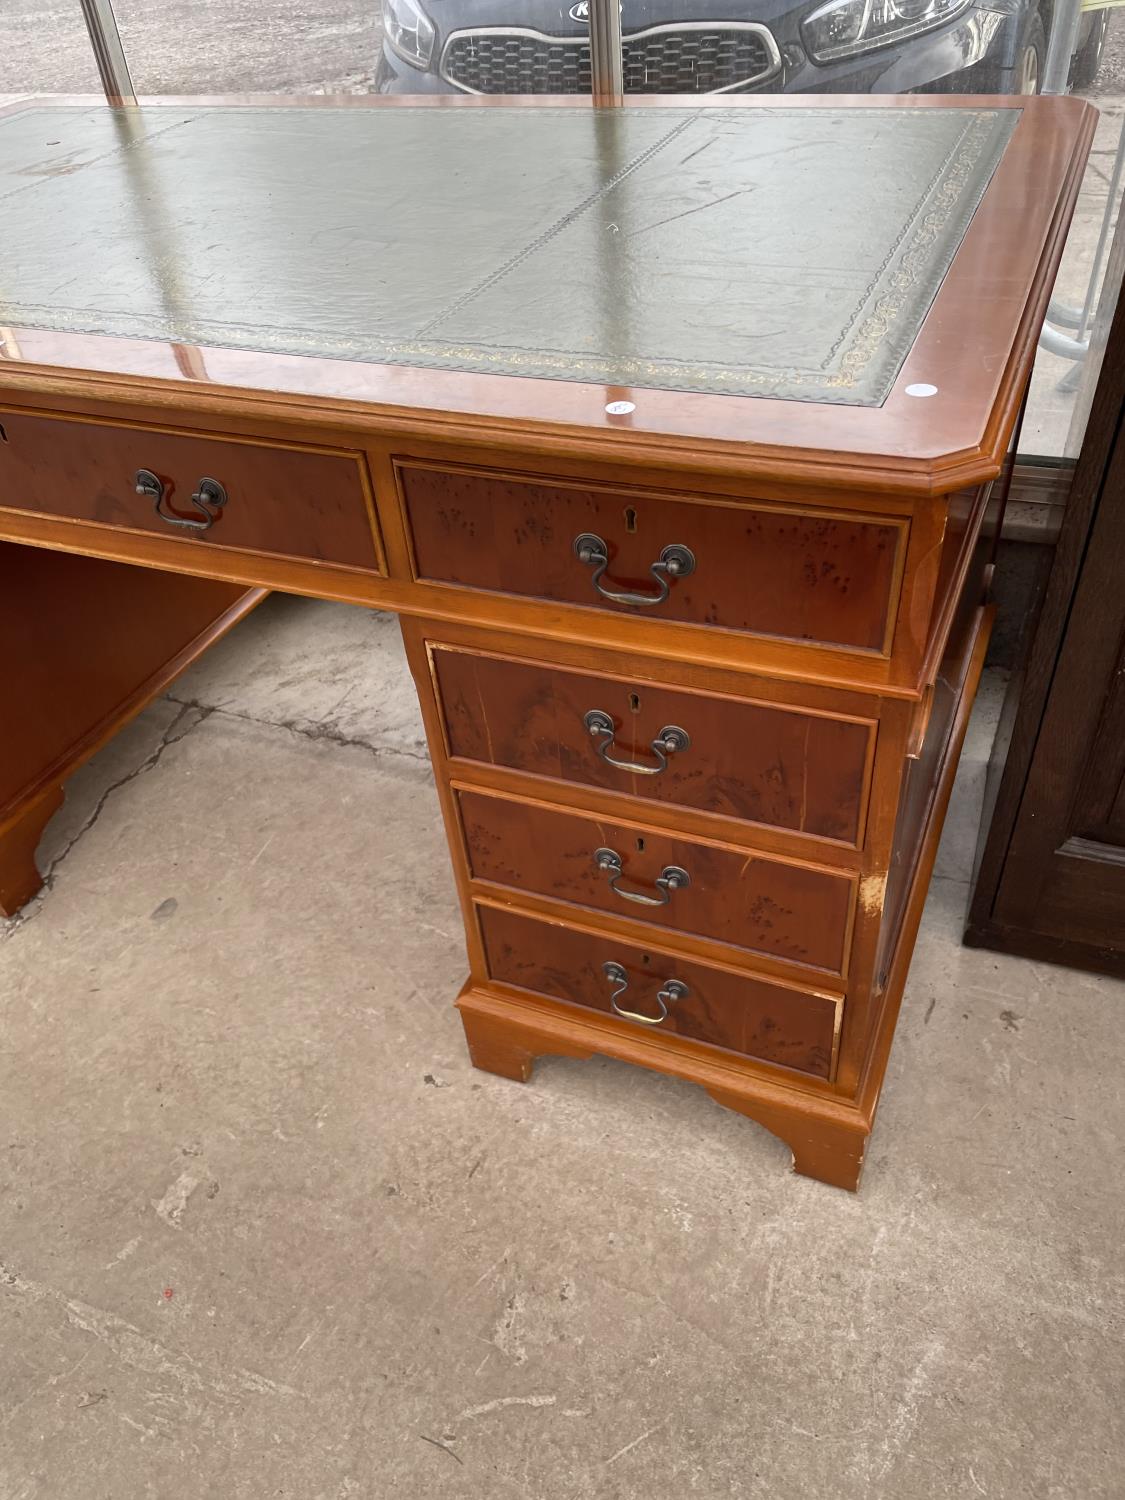 A REPRODUCTION YEW WOOD TWIN PEDESTAL DESK ENCLOSING NINE DRAWERS WITH INSET LEATHER TOP 60" X 36" - Image 4 of 4